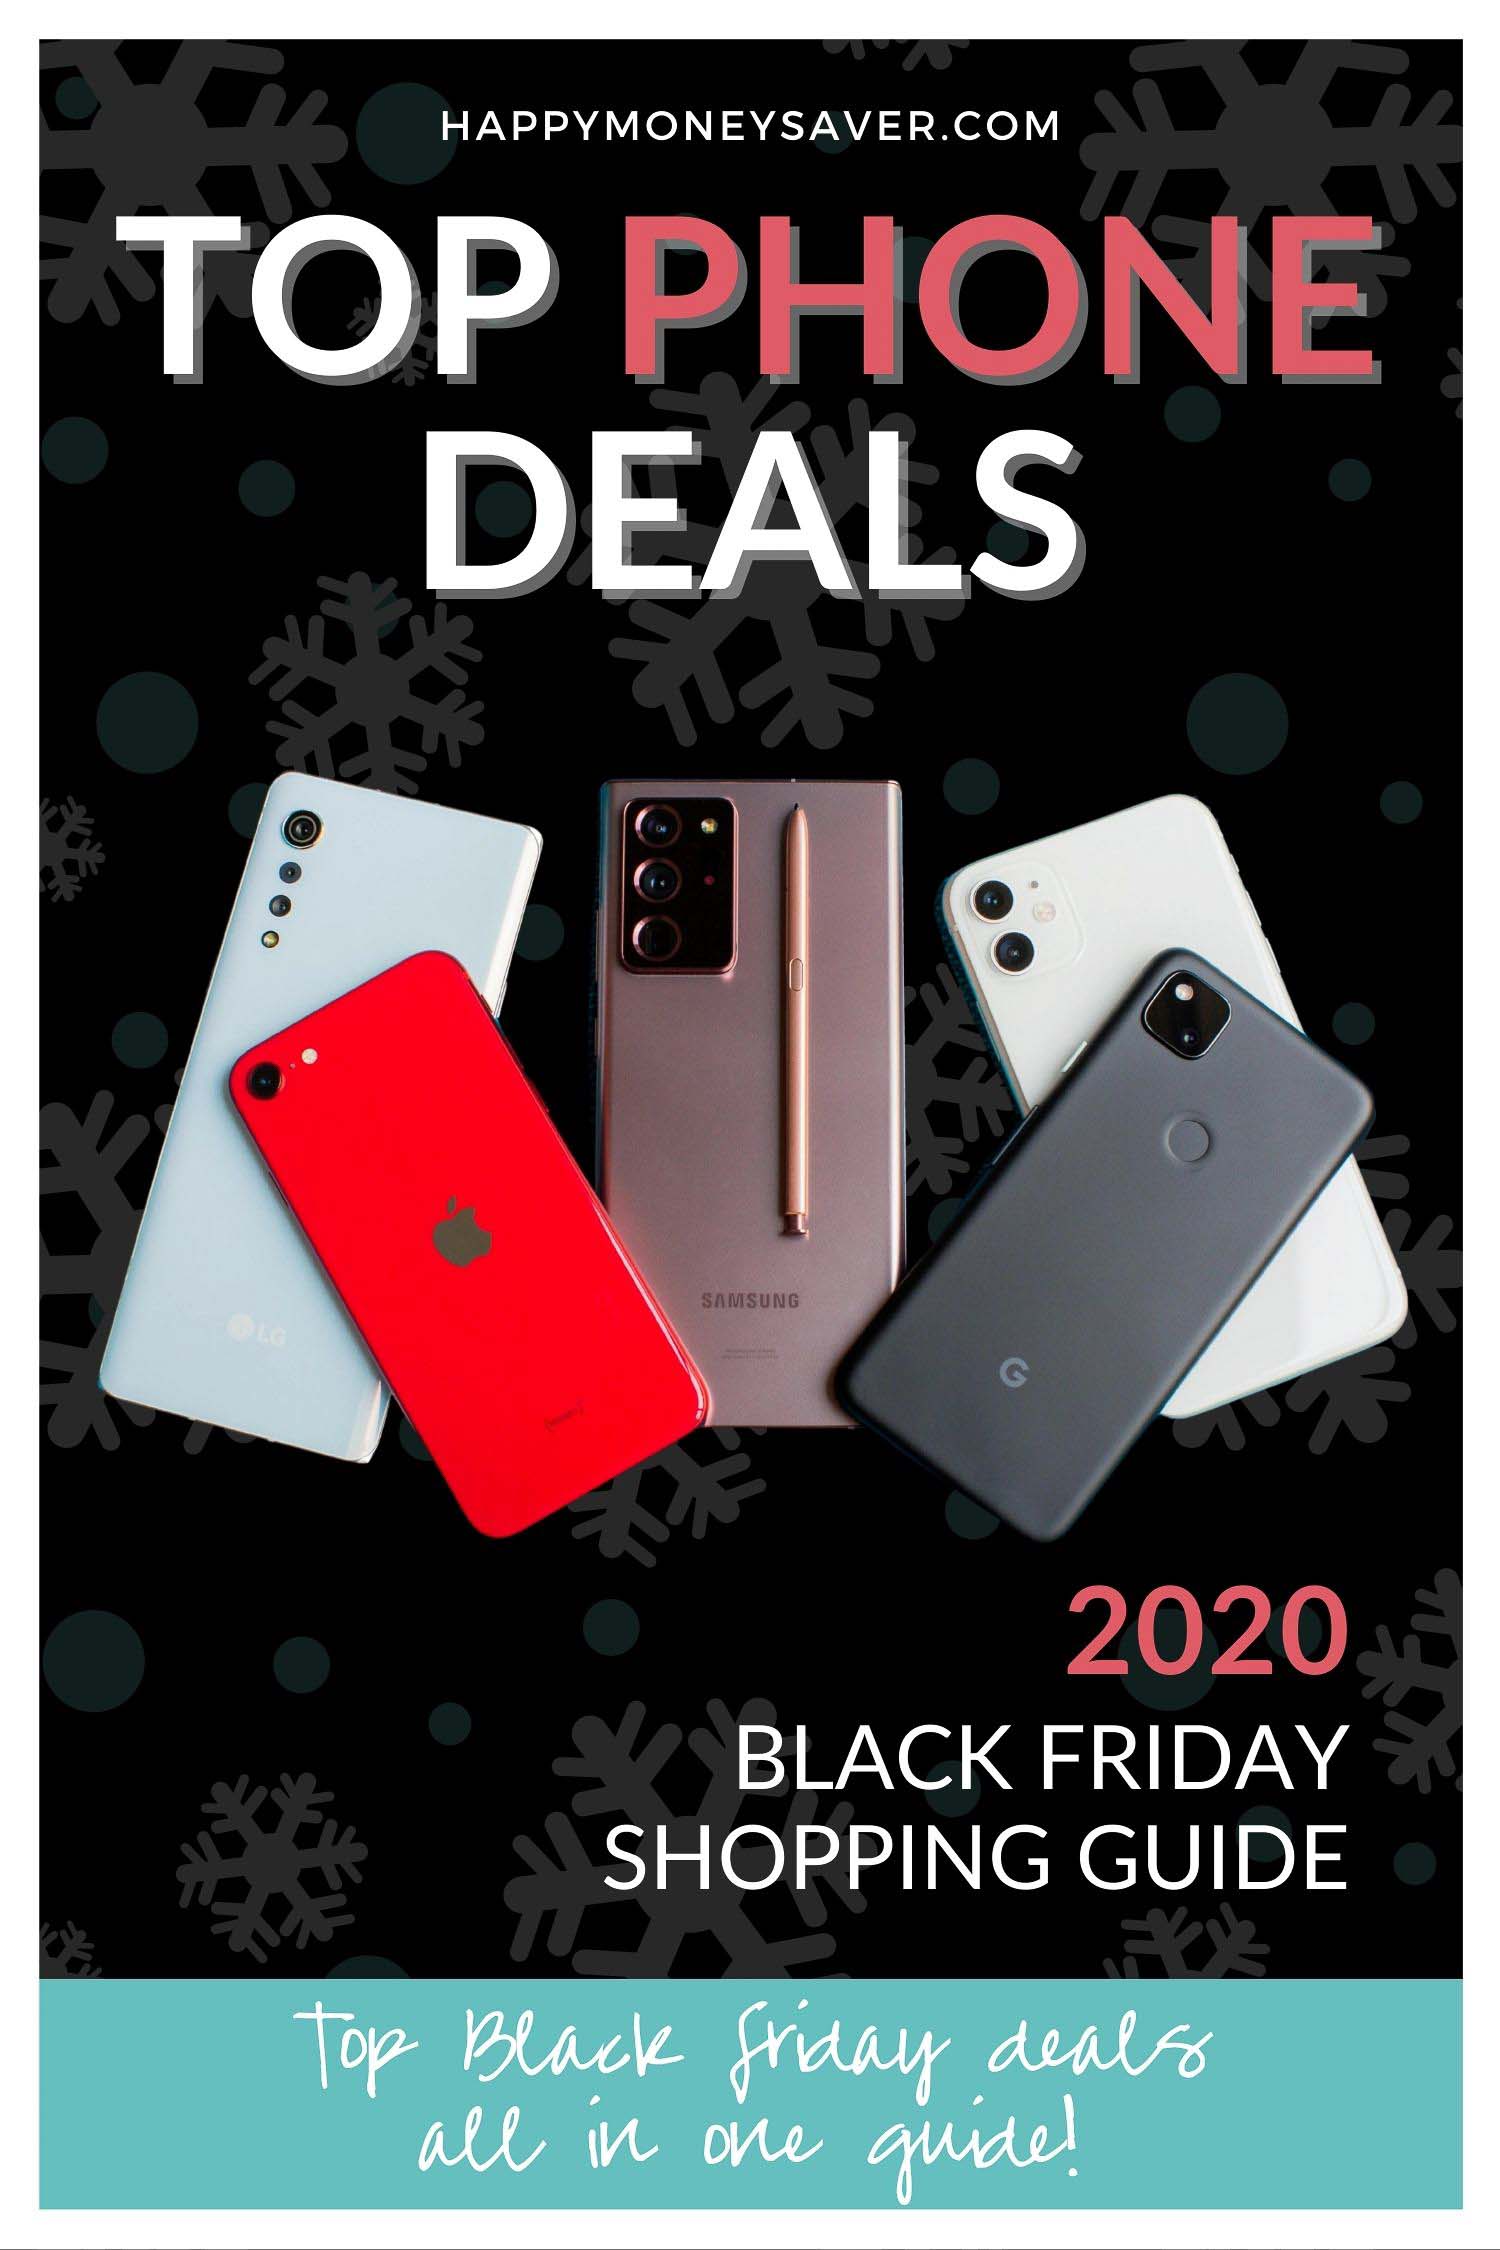 Top Black Friday PHONE Deals for 2020 Happy Money Saver